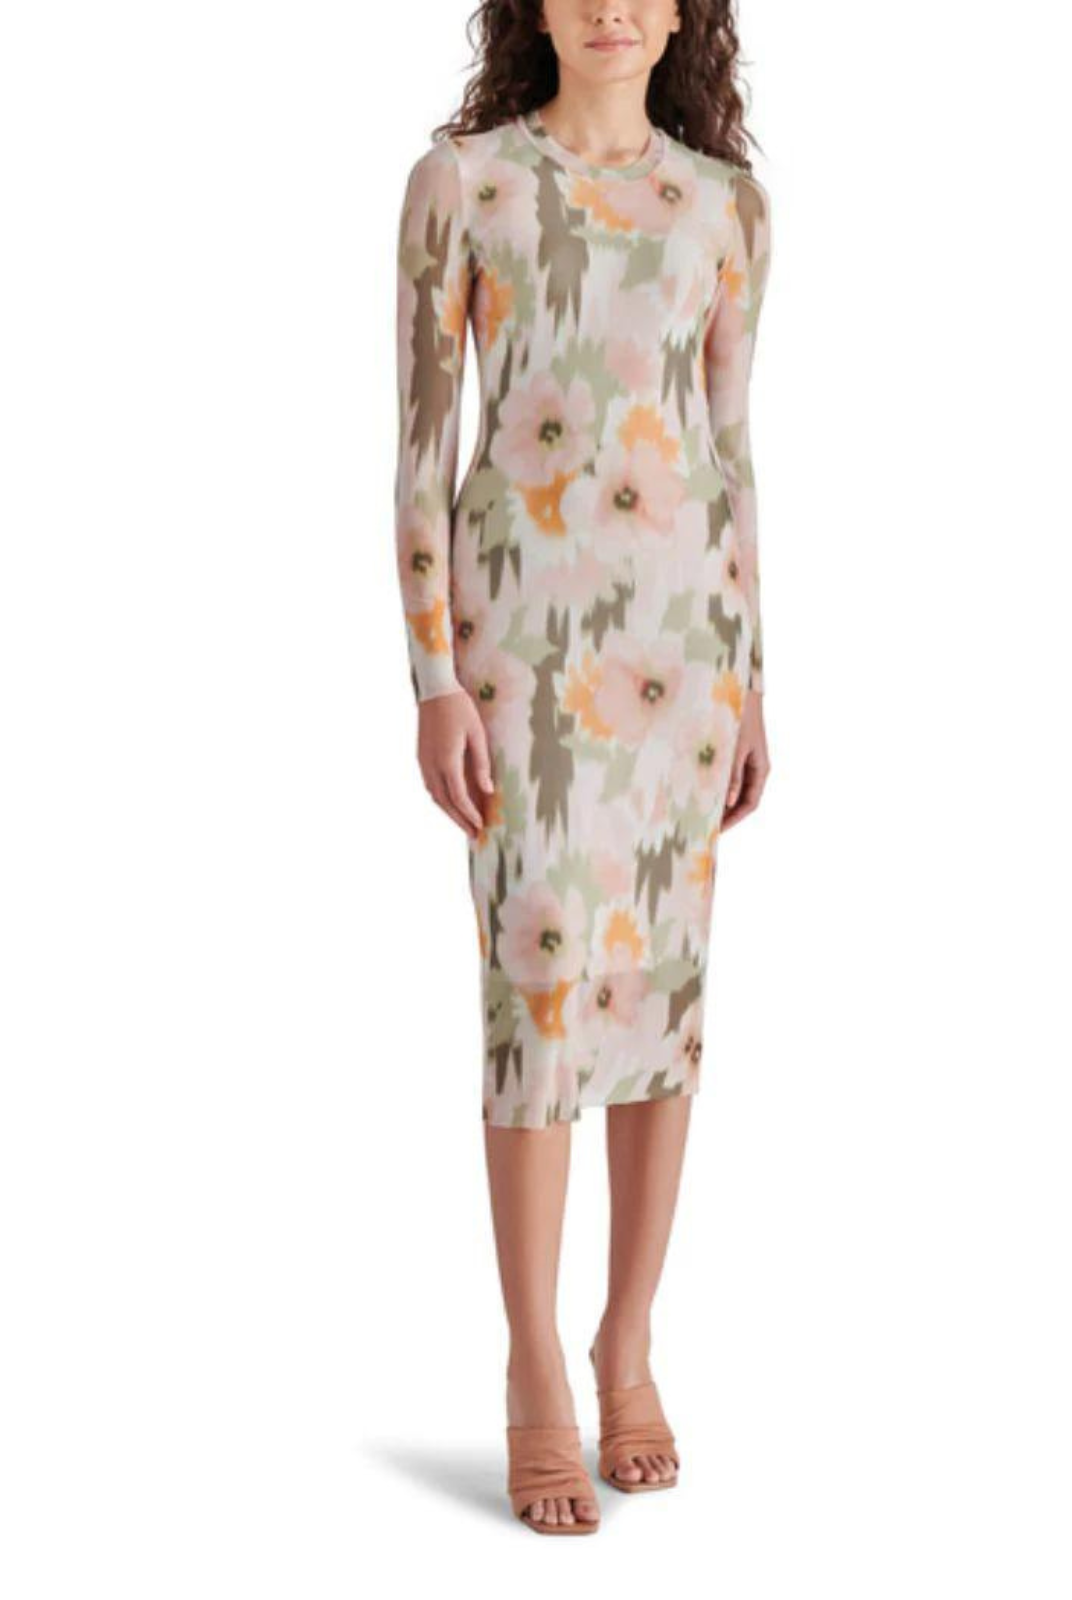 Steve Madden Hailee Dress. Elevate your vacation attire with the Steve Madden Hailee Dress in a beautiful olive color and sheer fabric. Its eye-catching print and lightweight material make it the perfect piece for any getaway. Bring some extra style to your vacation wardrobe with the Hailee Dress.